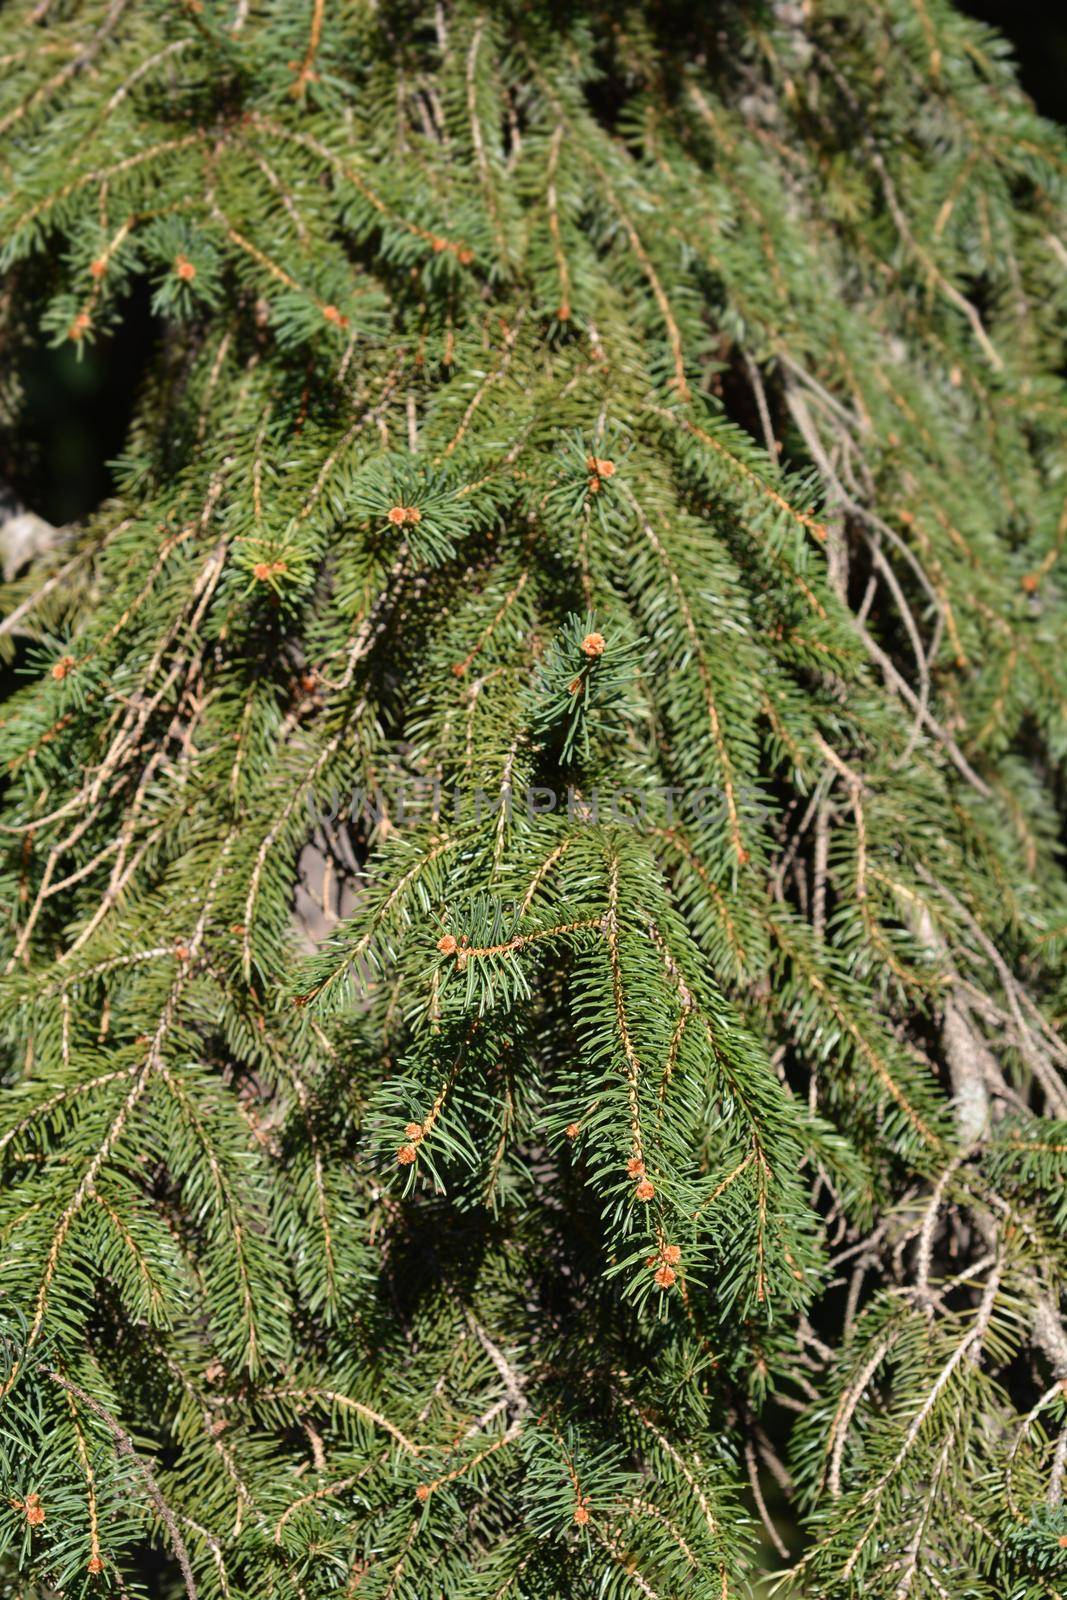 Norway spruce - Latin name - Picea abies